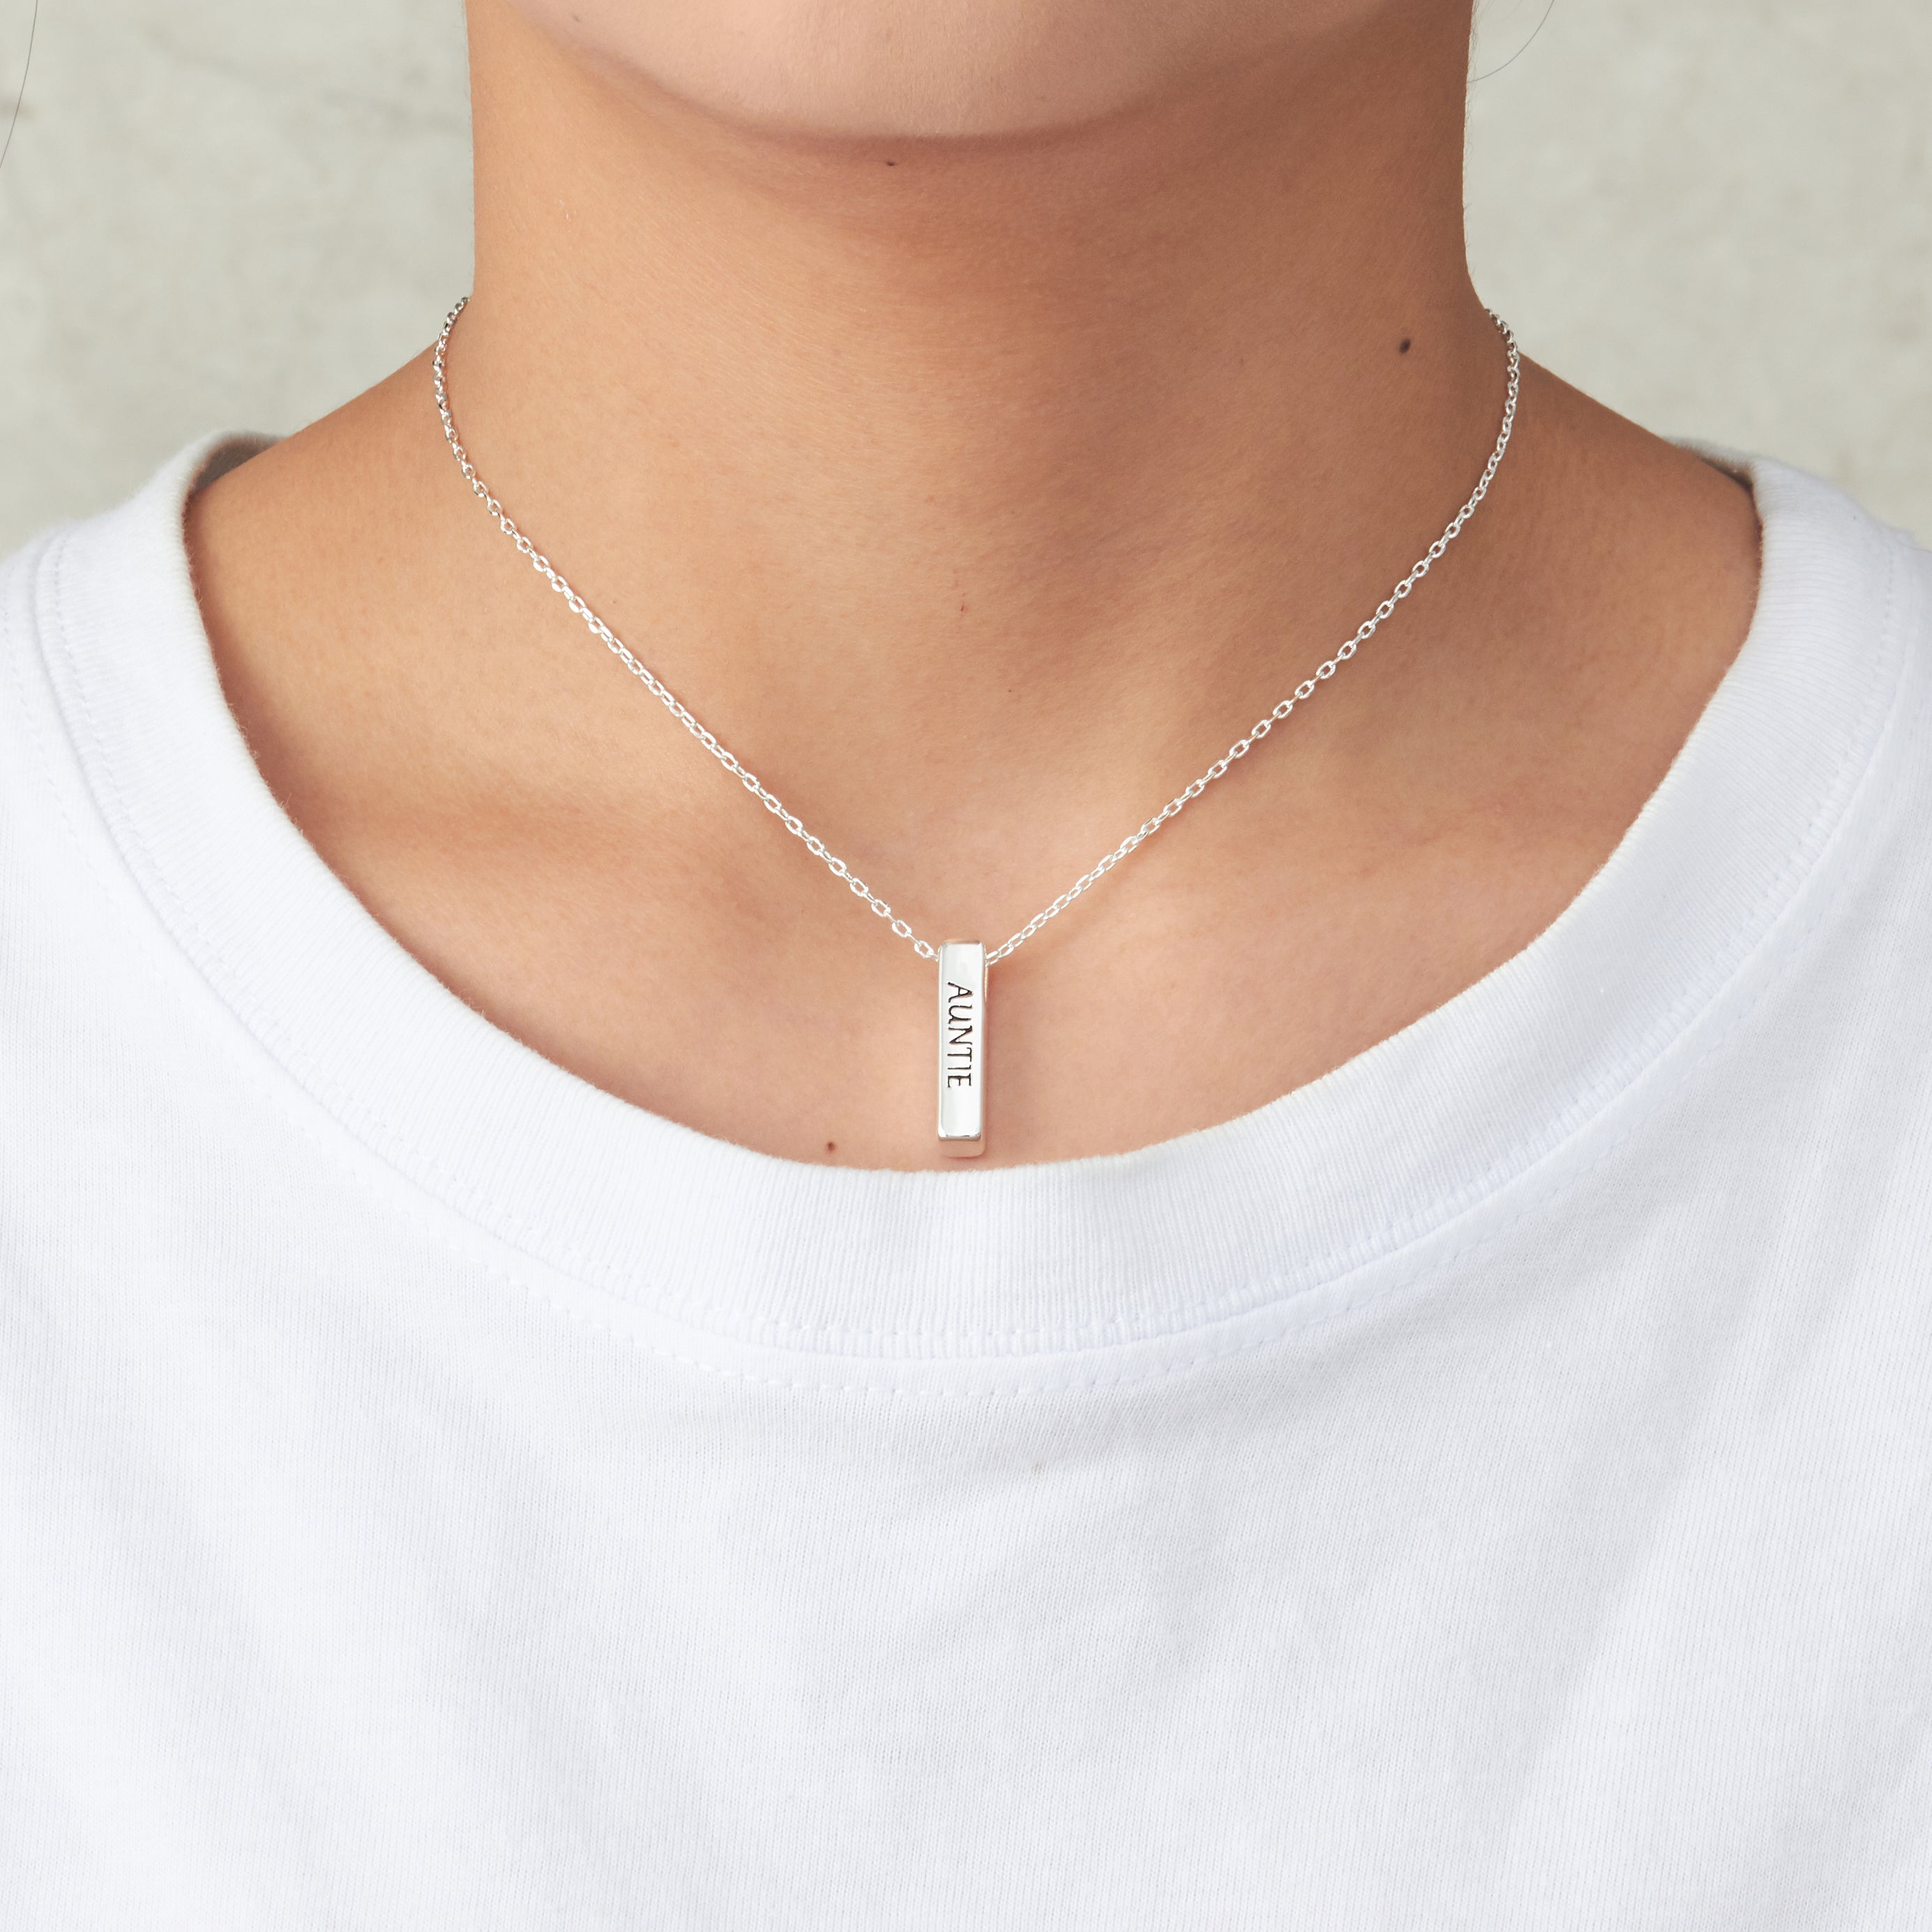 Silver Plated Auntie Bar Necklace